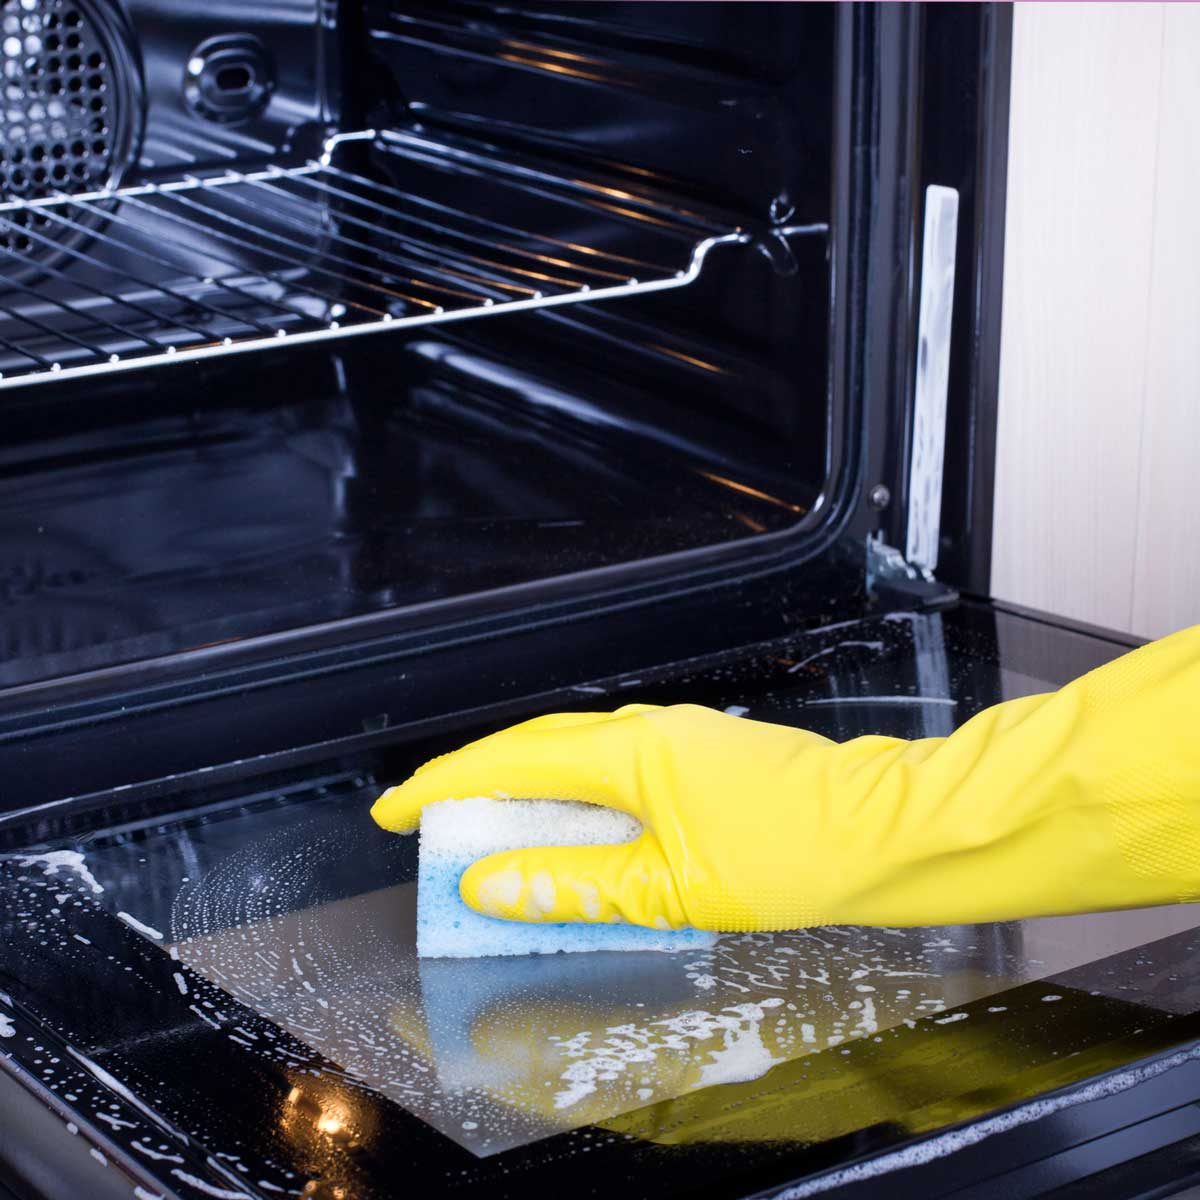 https://www.familyhandyman.com/wp-content/uploads/2021/04/cleaning-oven-GettyImages-517797998.jpg